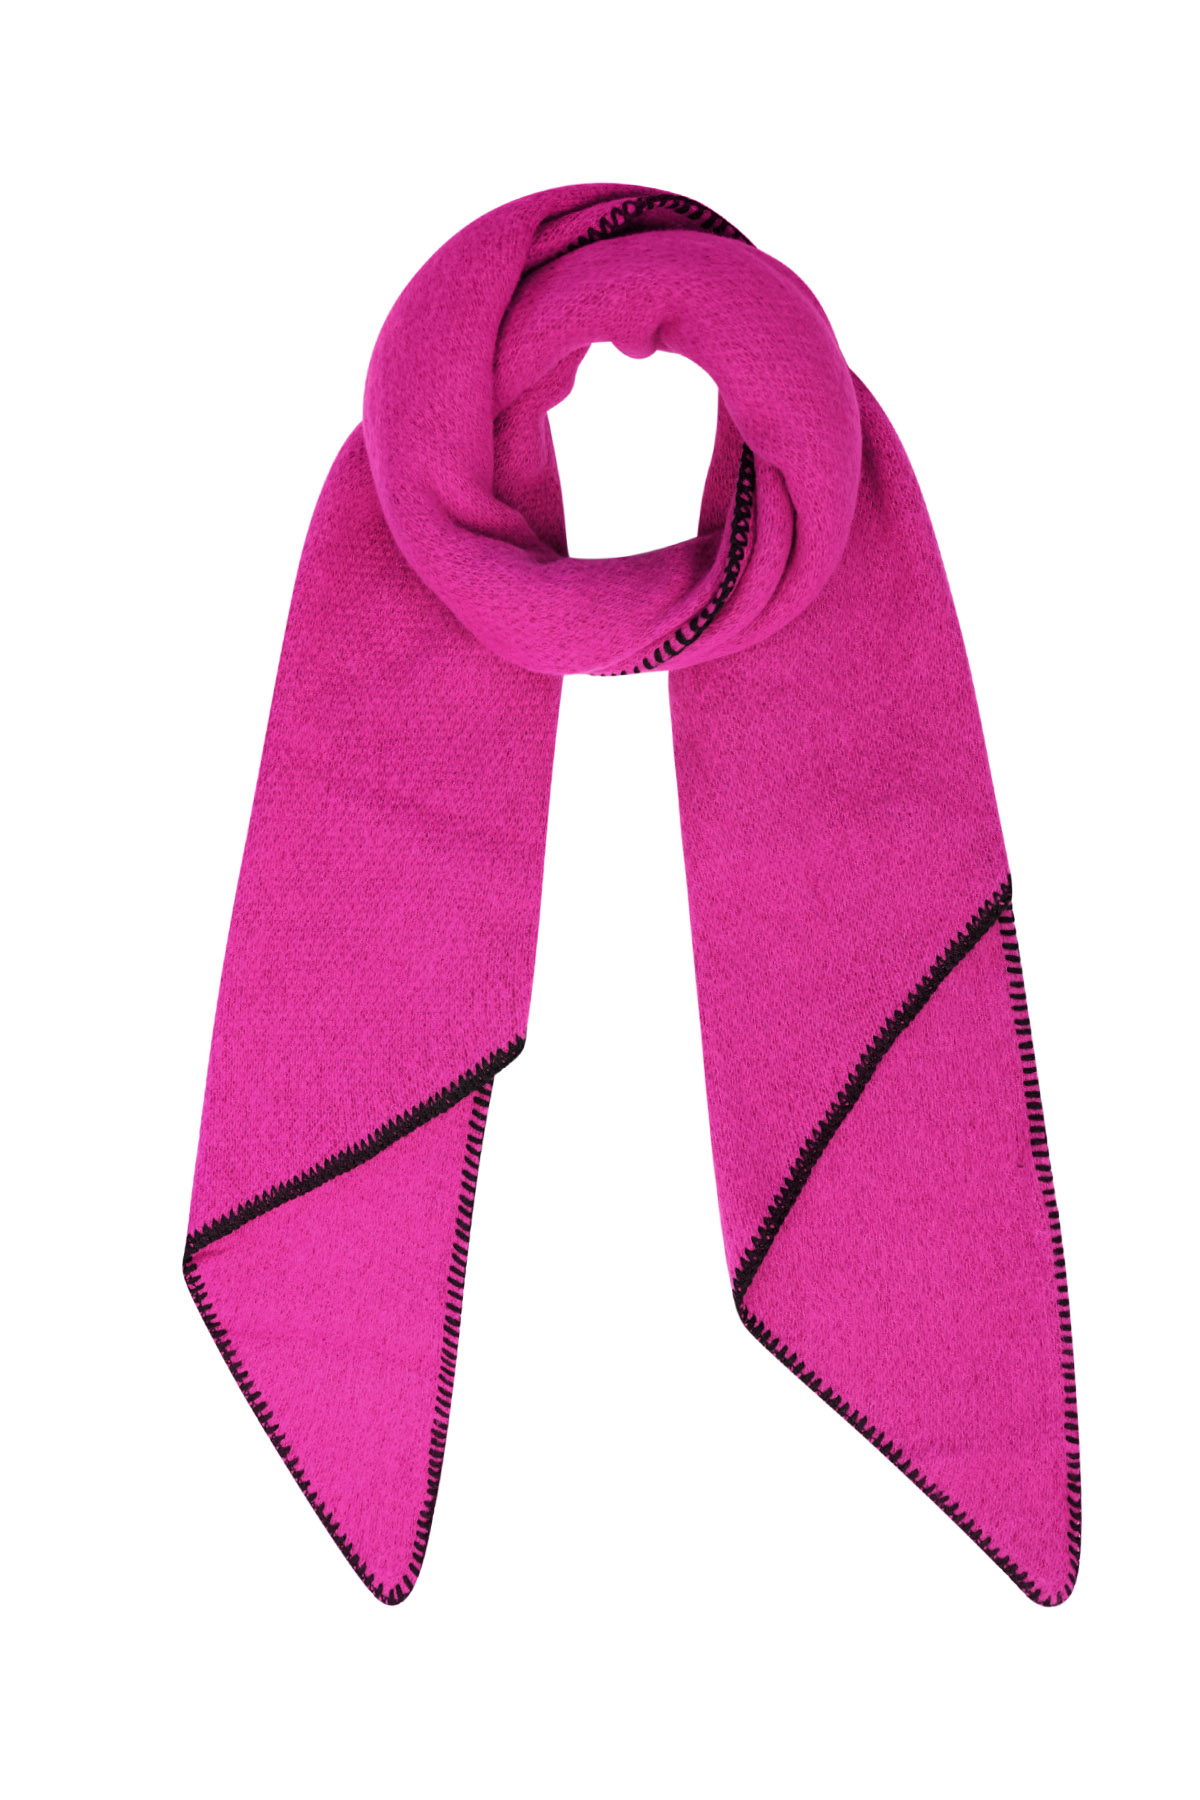 Winter scarf single-colored with black stitching - fuchsia h5 